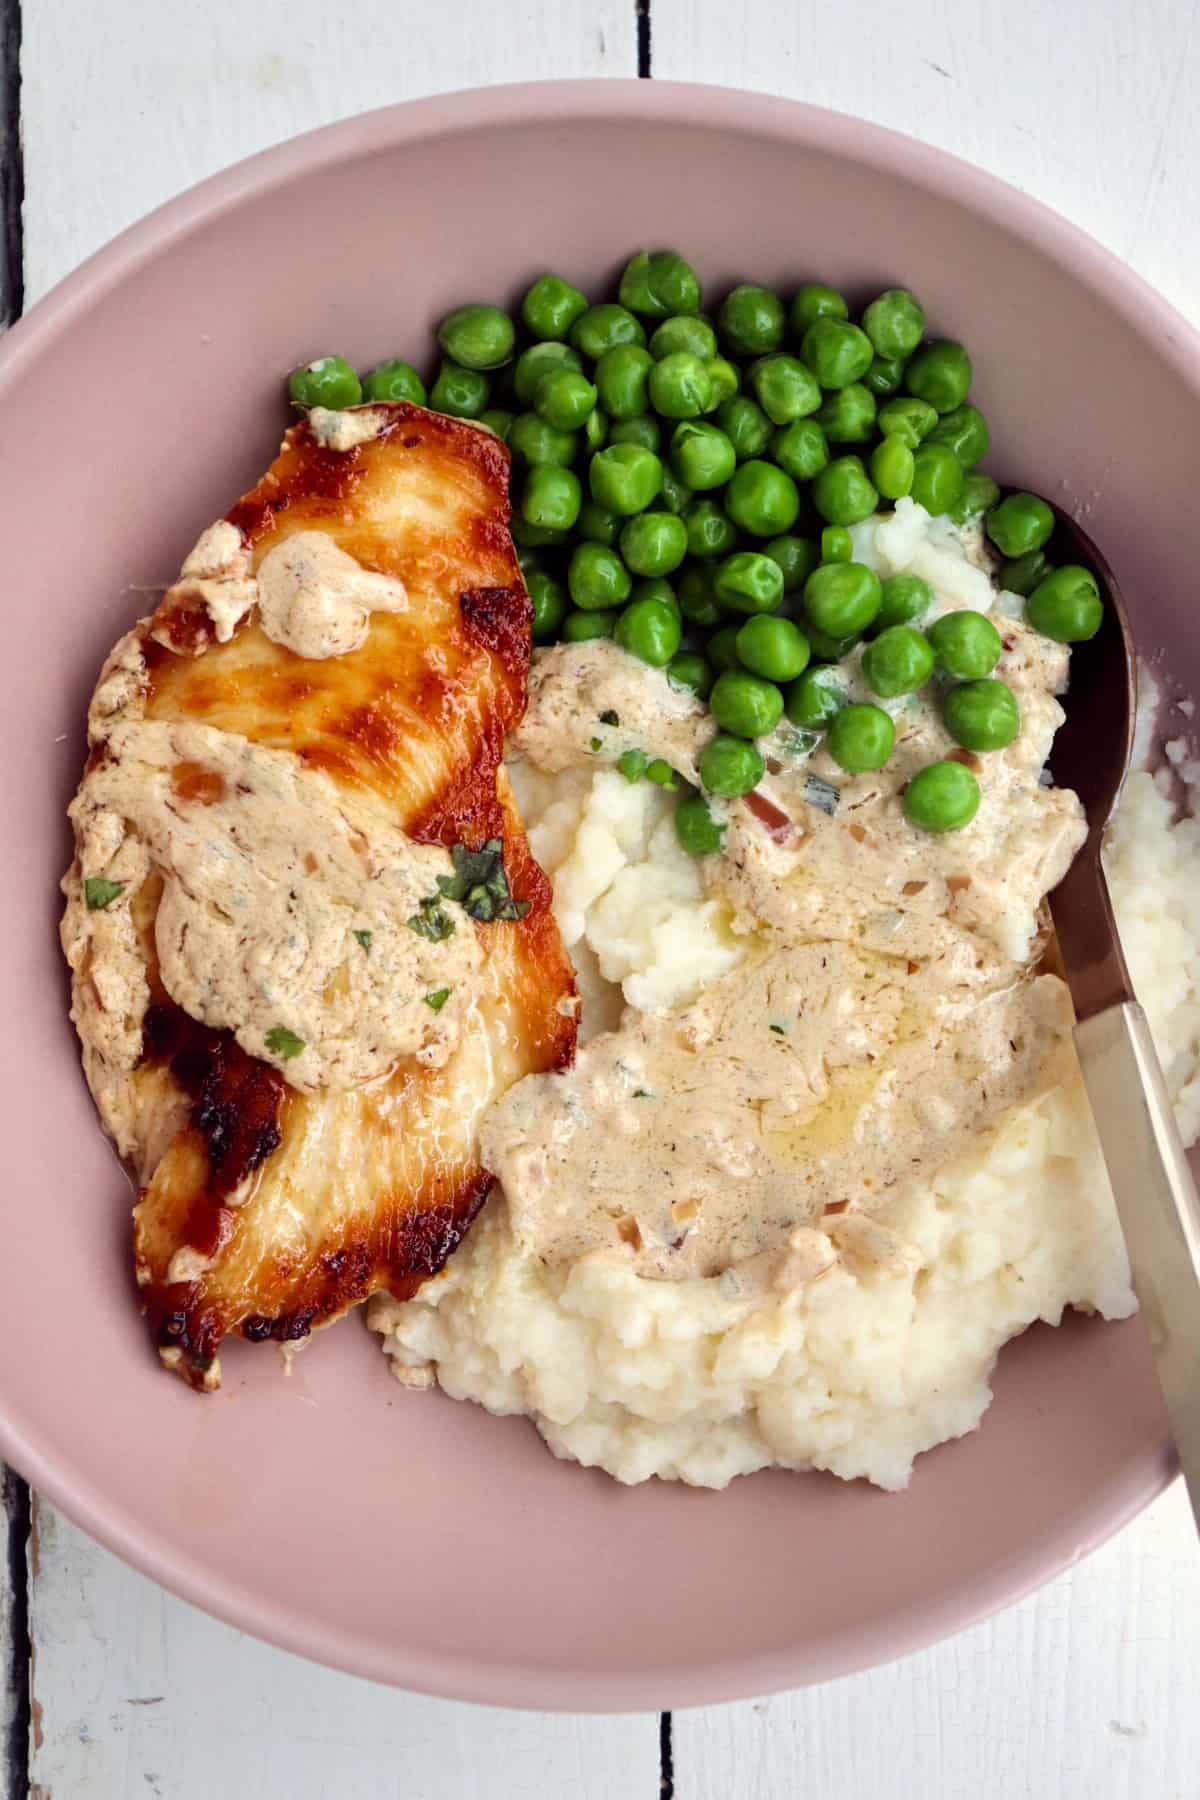 browned chicken with boursin sauce, mashed potatoes, and peas in a pink bowl with a spoon.